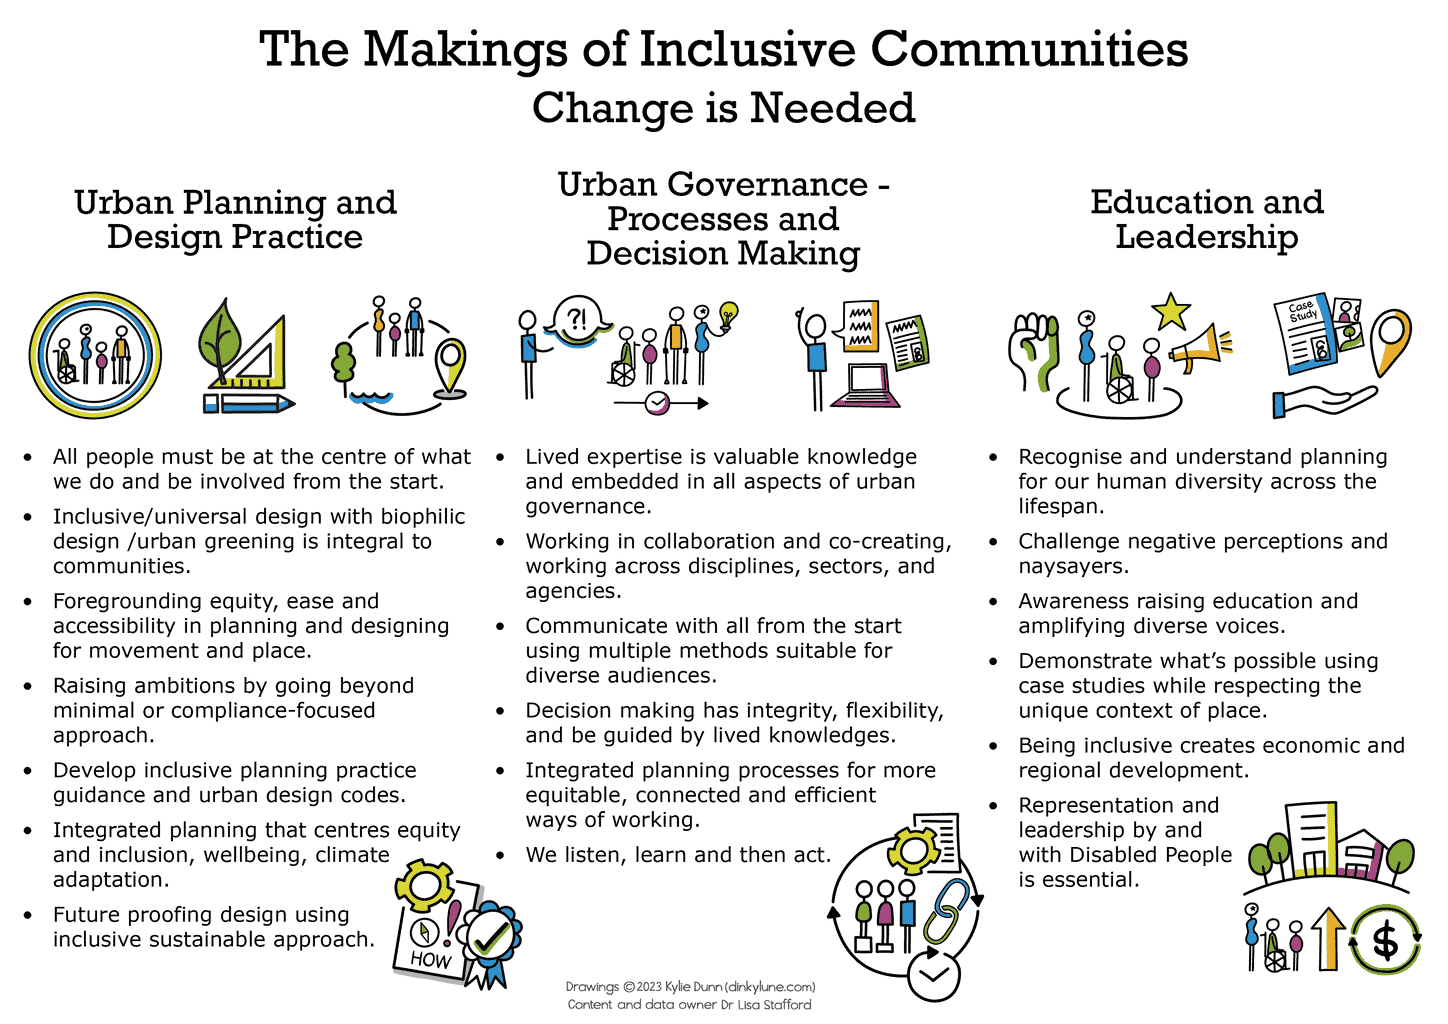 Drawing of the Makings of Inclusive Communities